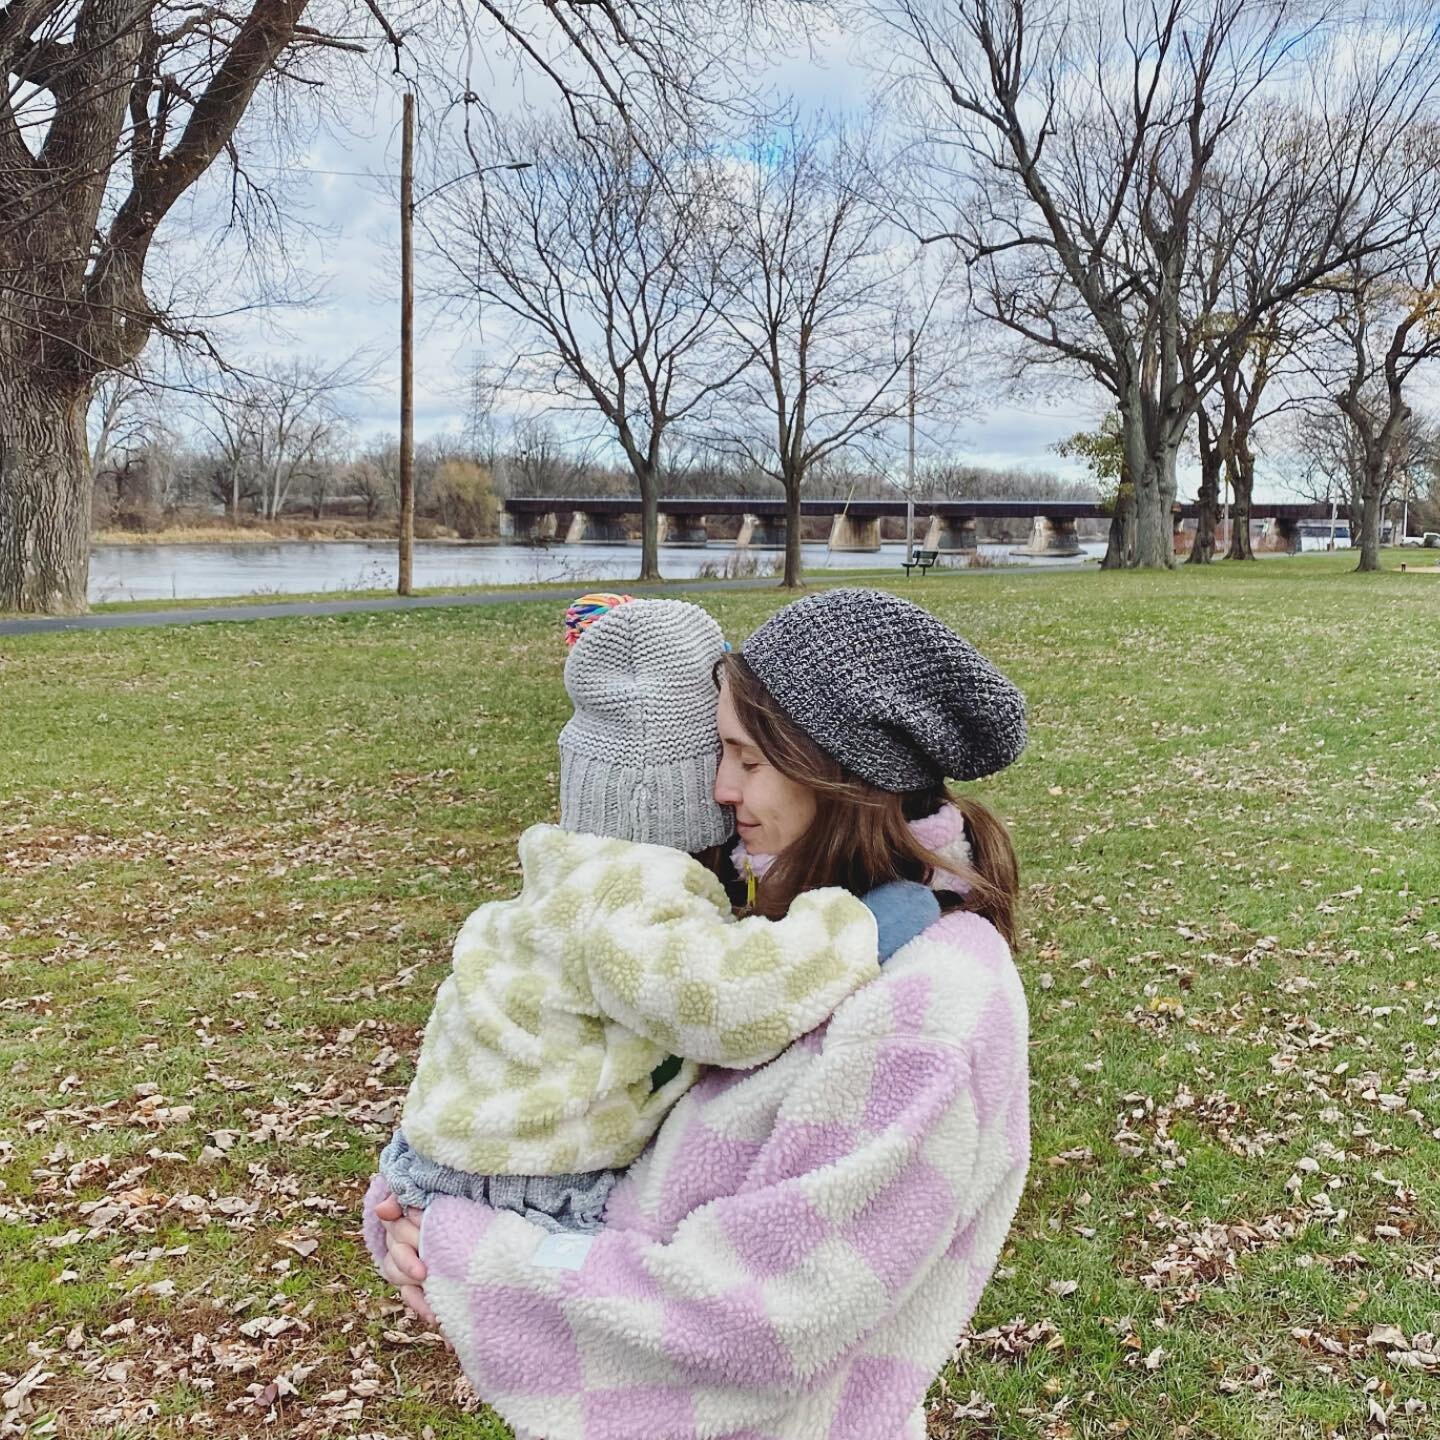 Last weekend matchy-matchy with my baby baby. (It was very cold)